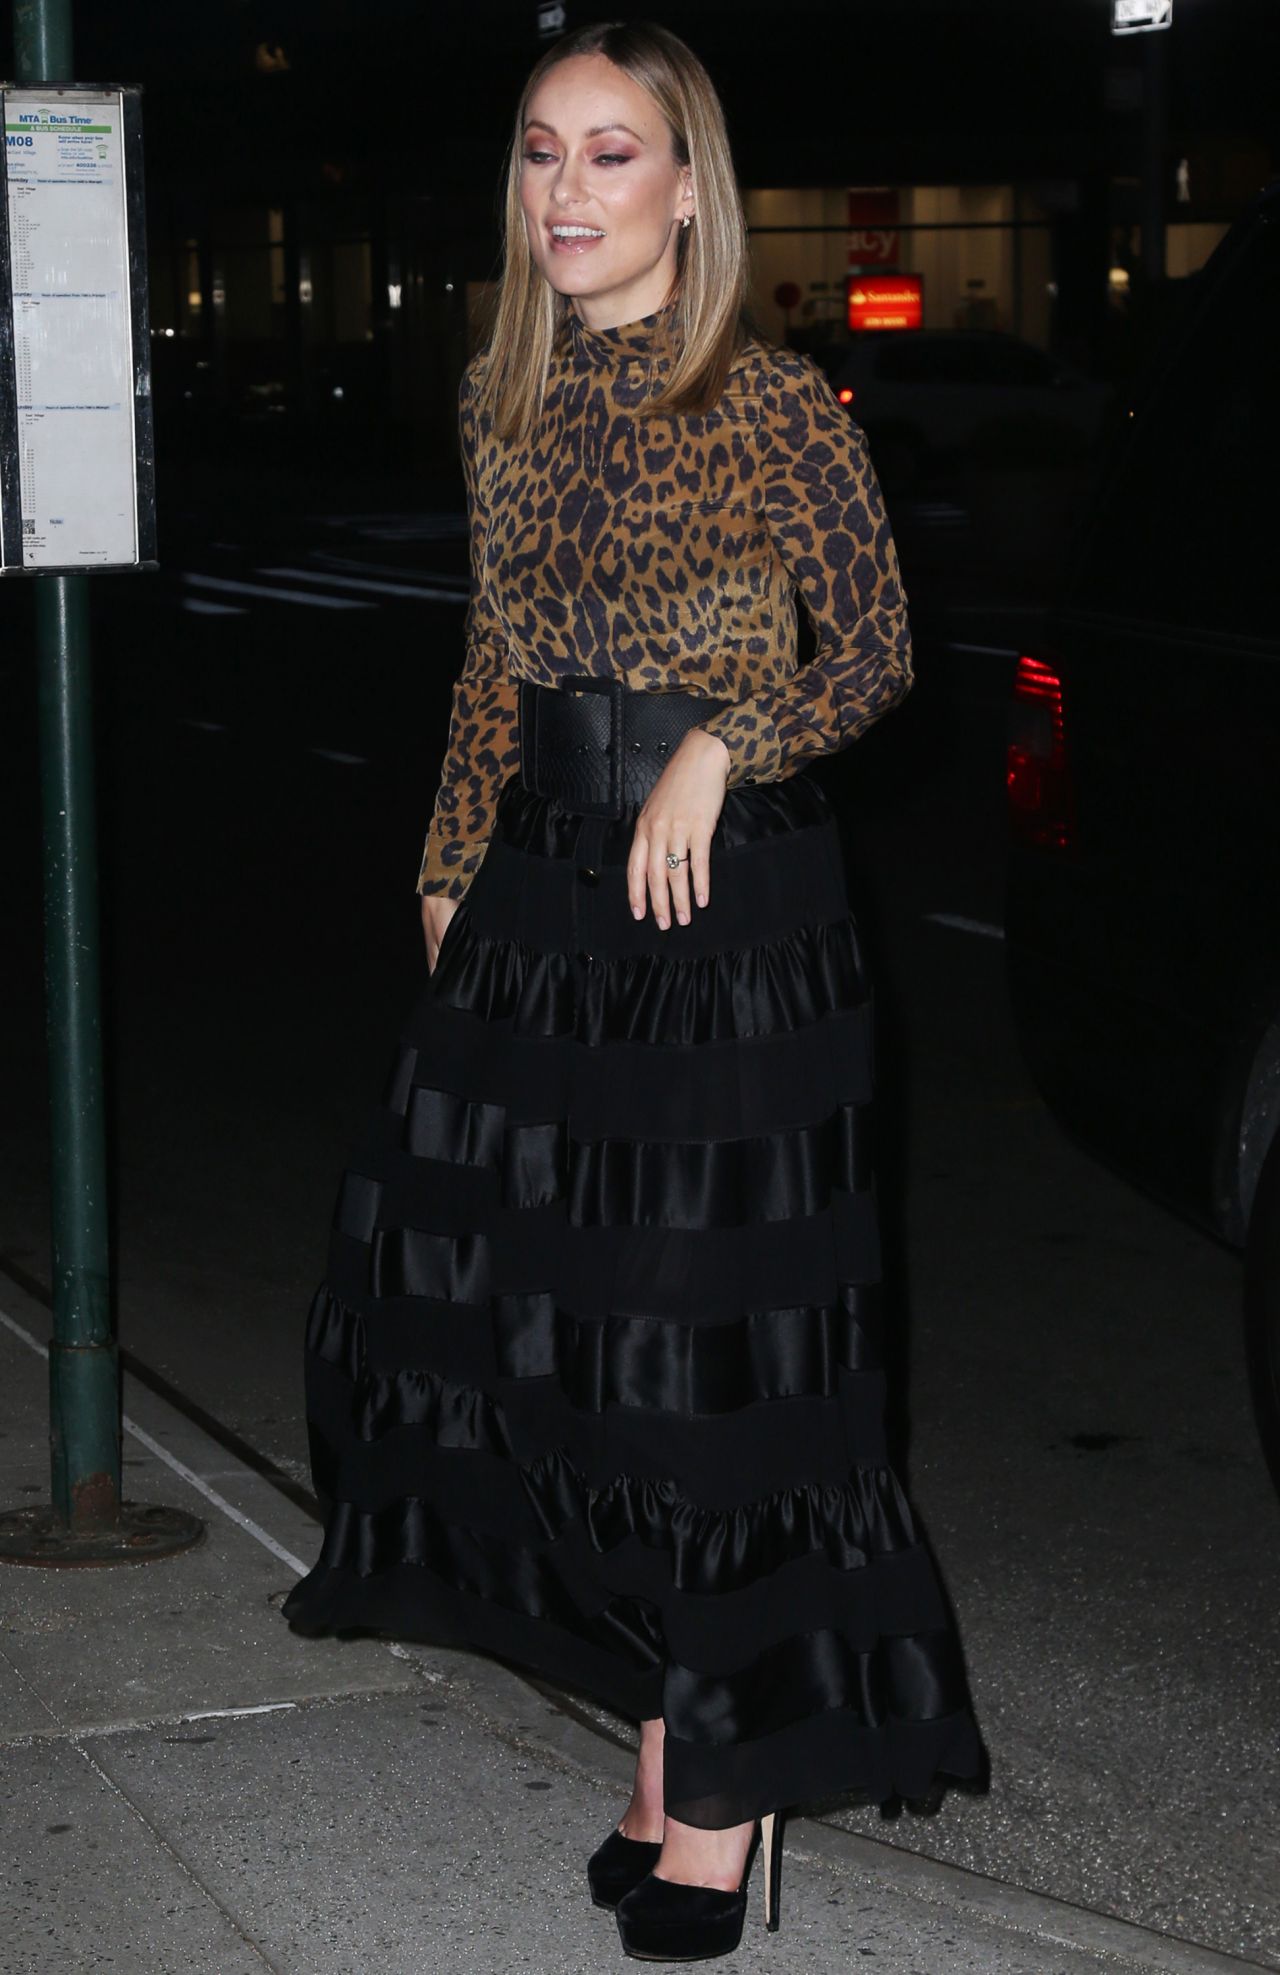 olivia-wilde-night-out-style-05-22-2019-3.jpg